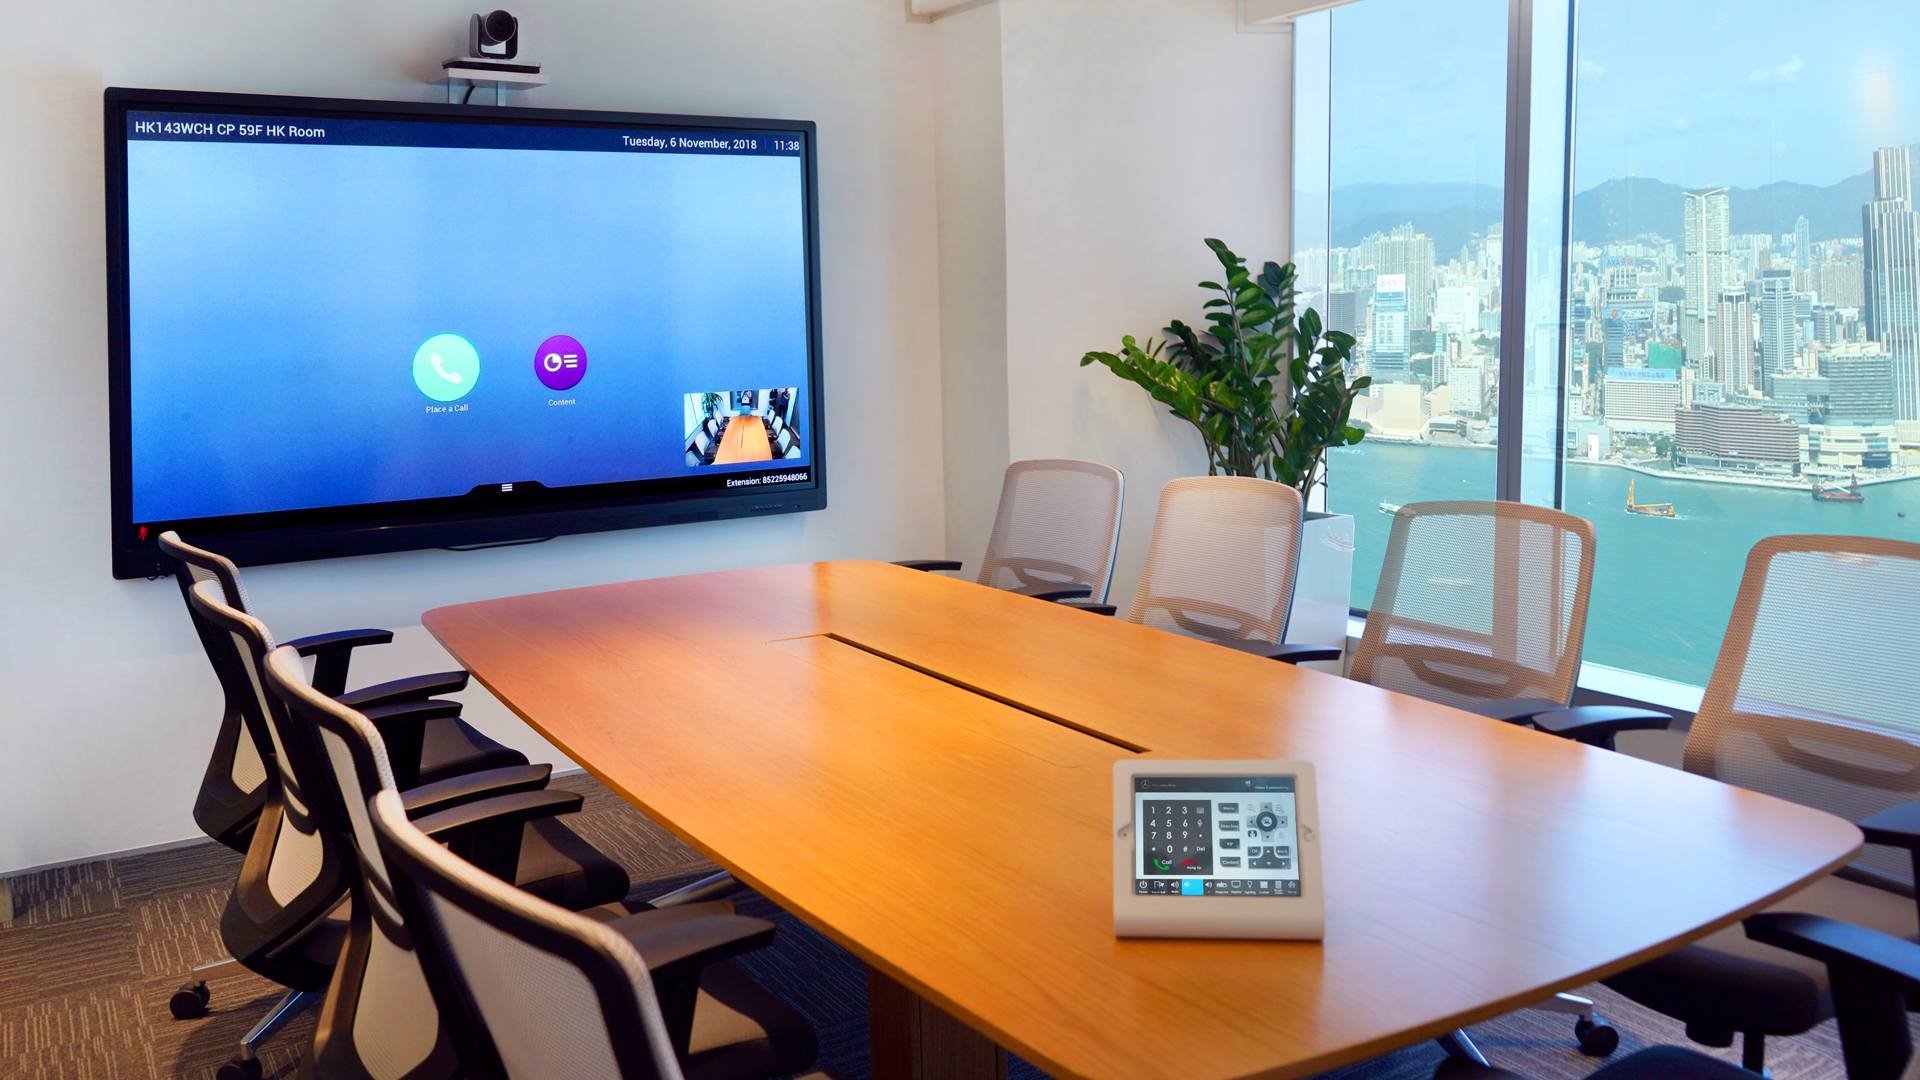 Meeting Room with Wireless Presentation